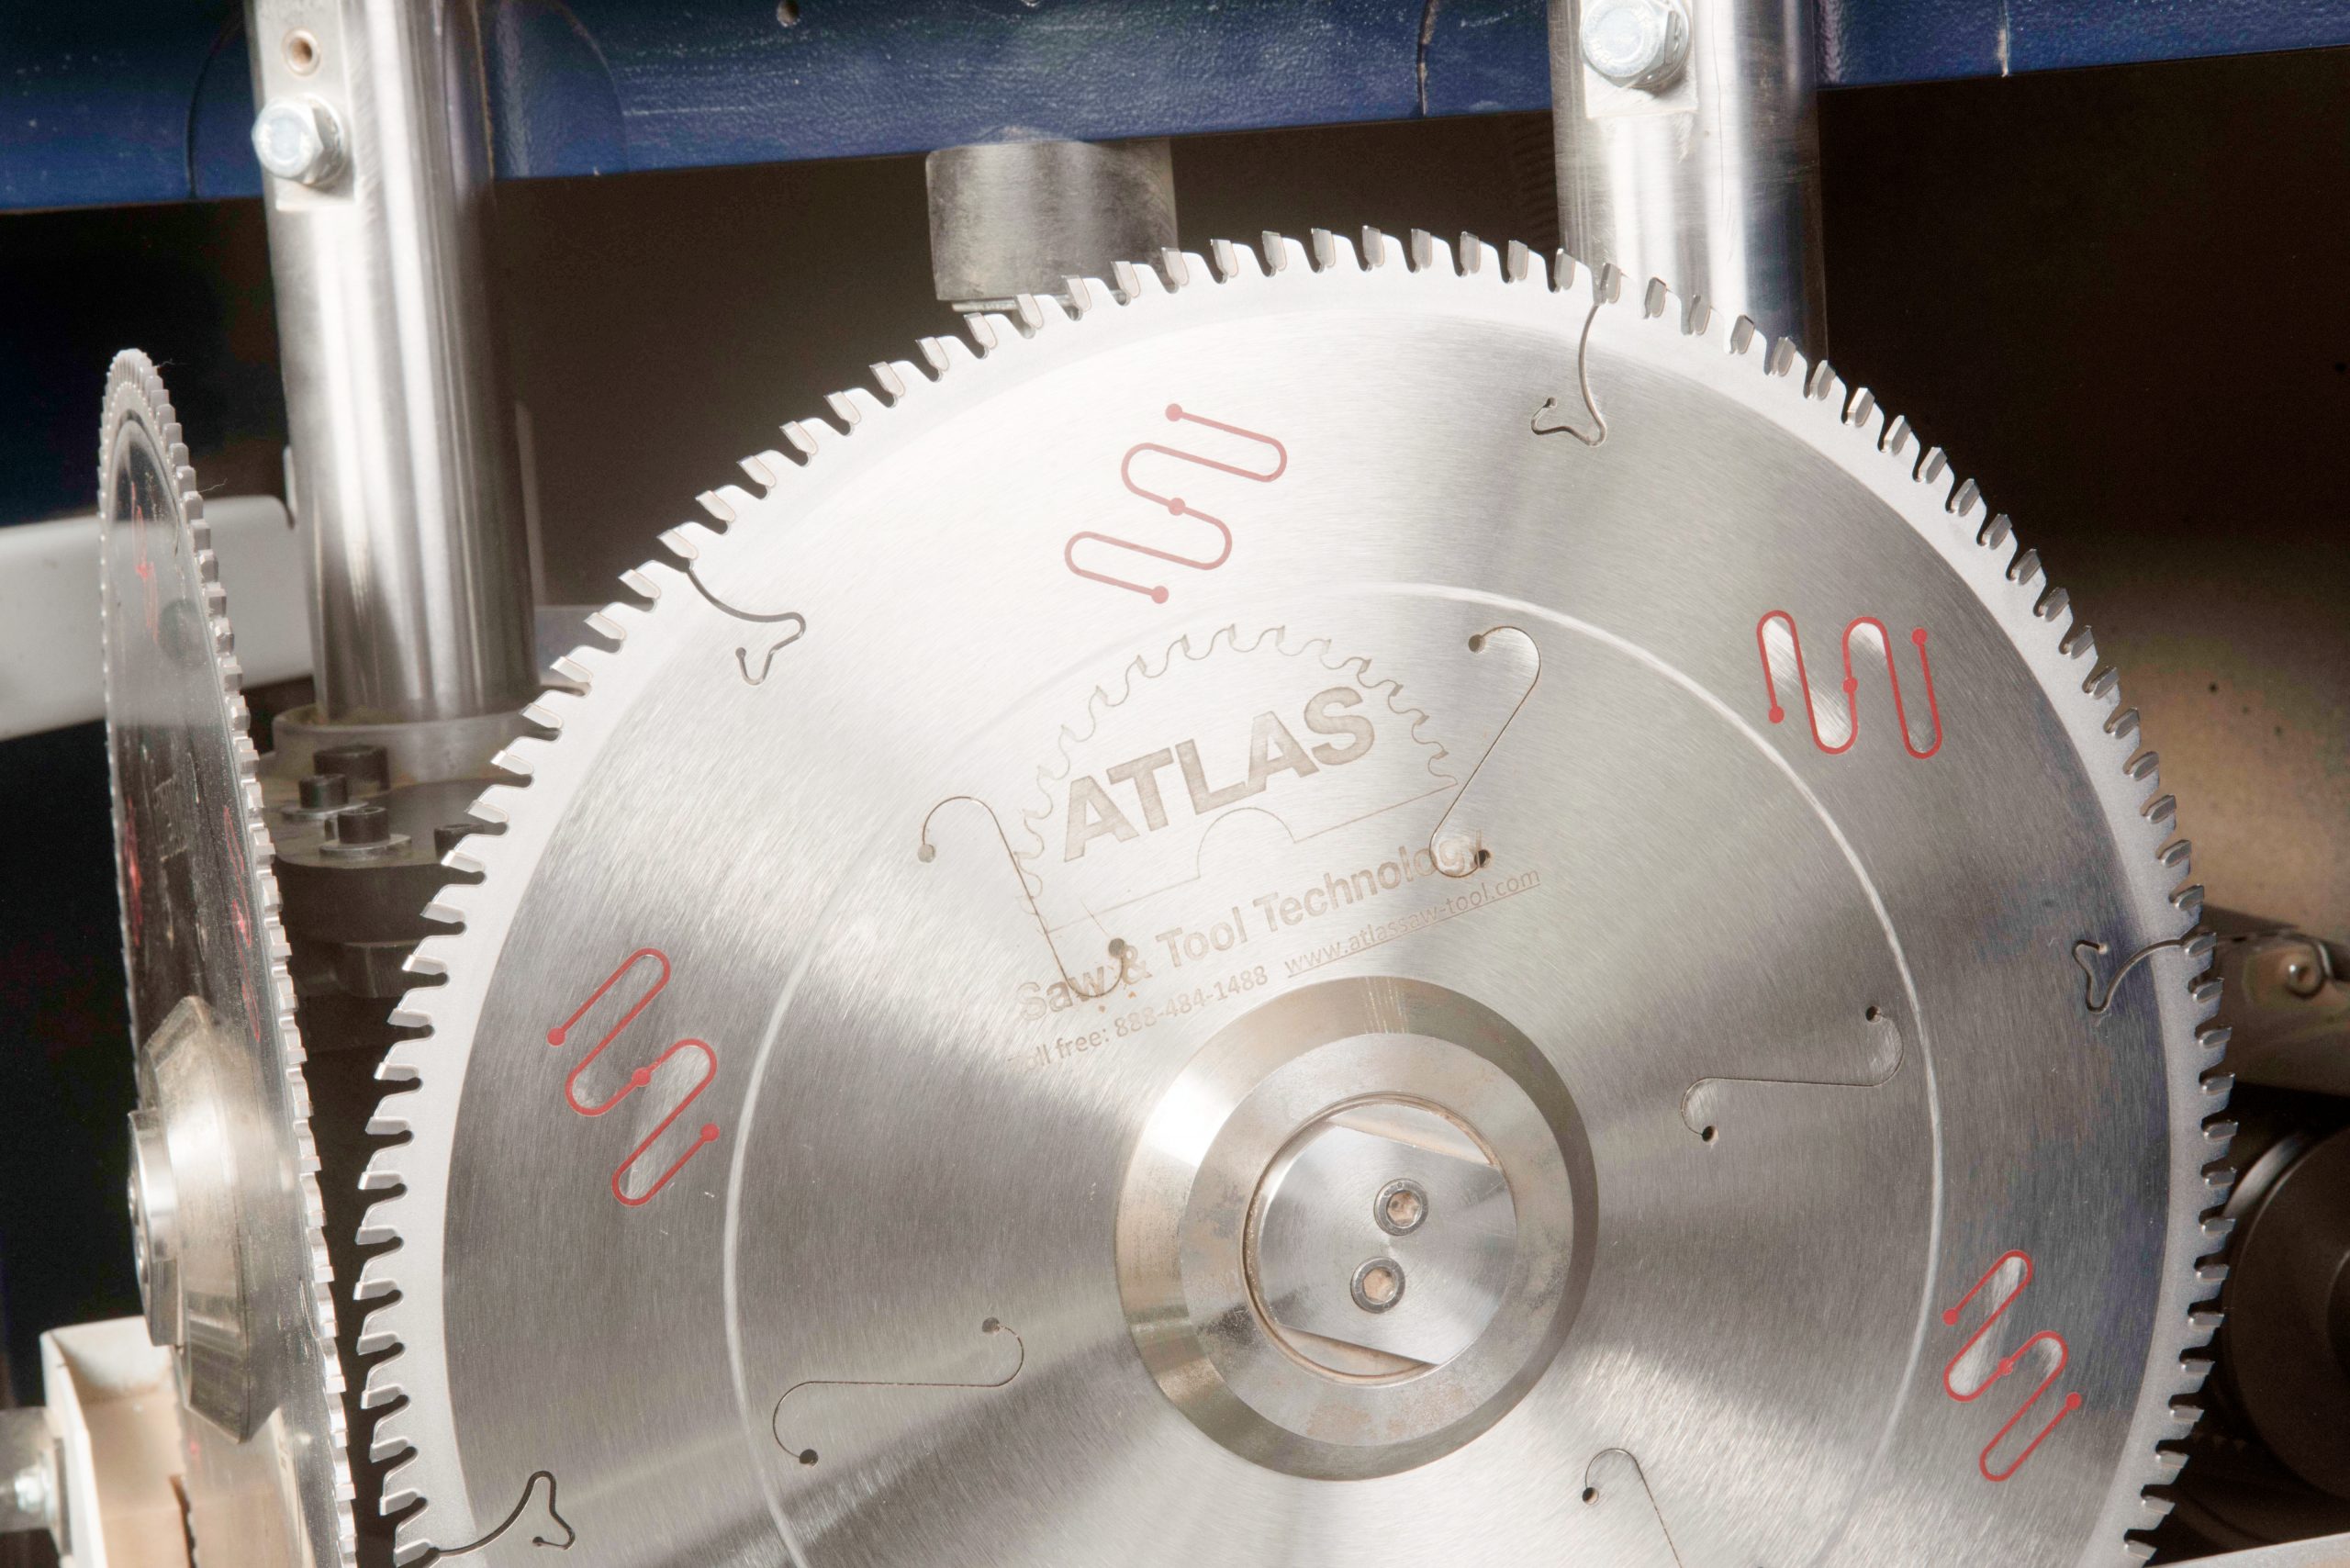 Atlas Saw Blades for Picture Framing